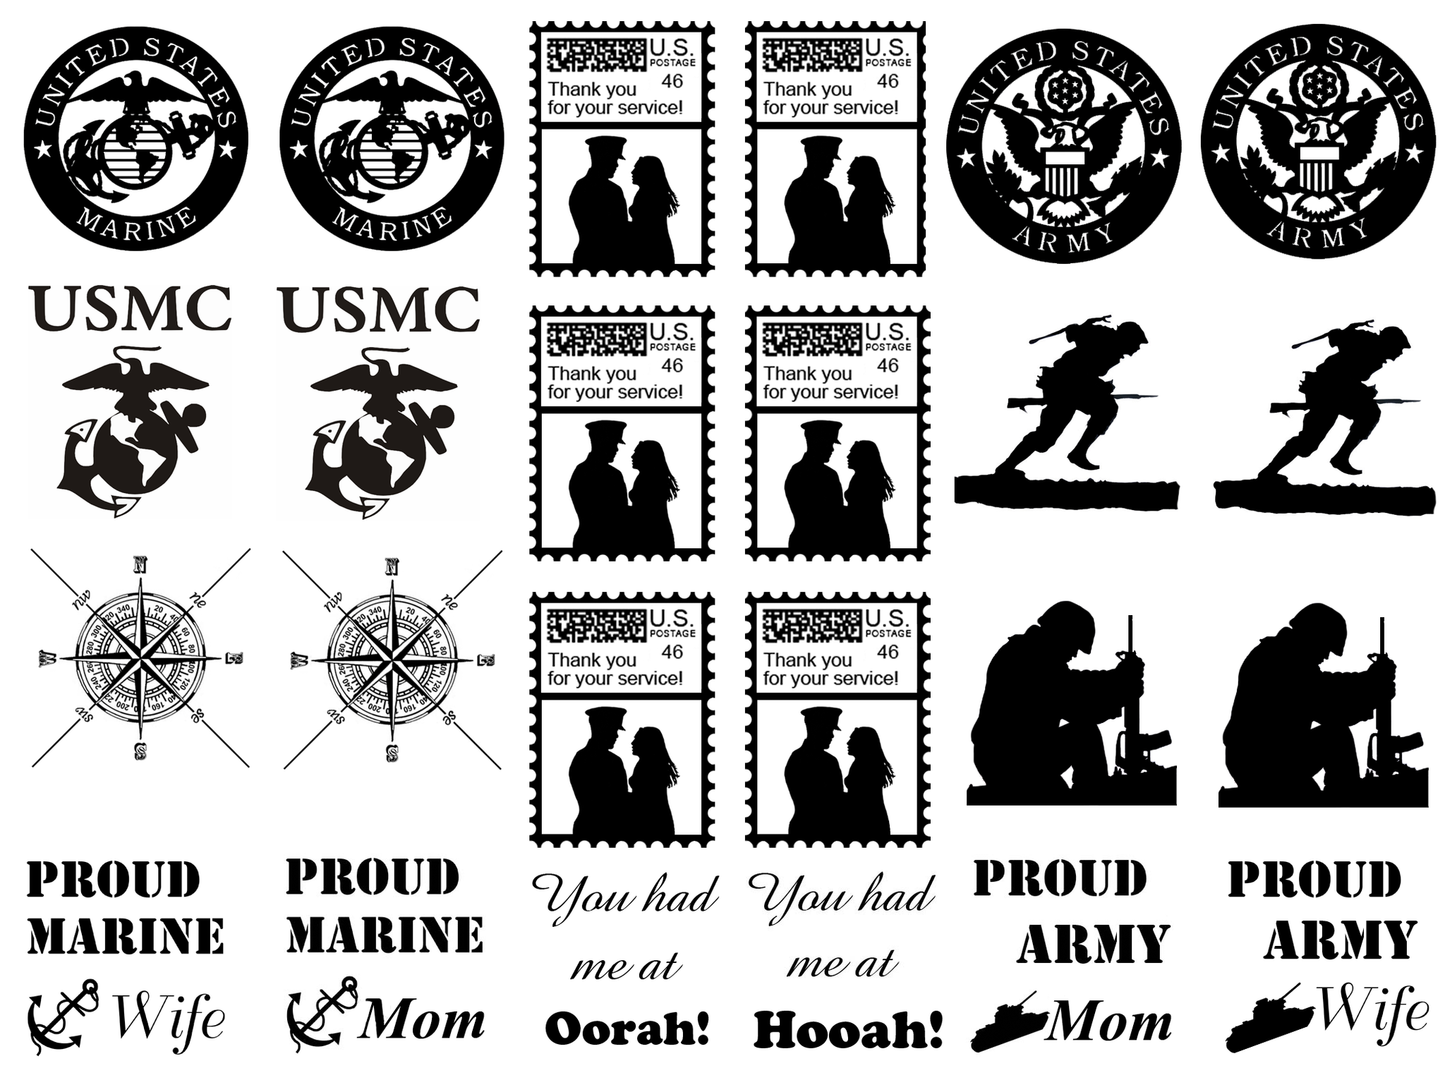 Military Marine Army 24 pcs 1" to 1-1/4"  Black Fused Glass Decals